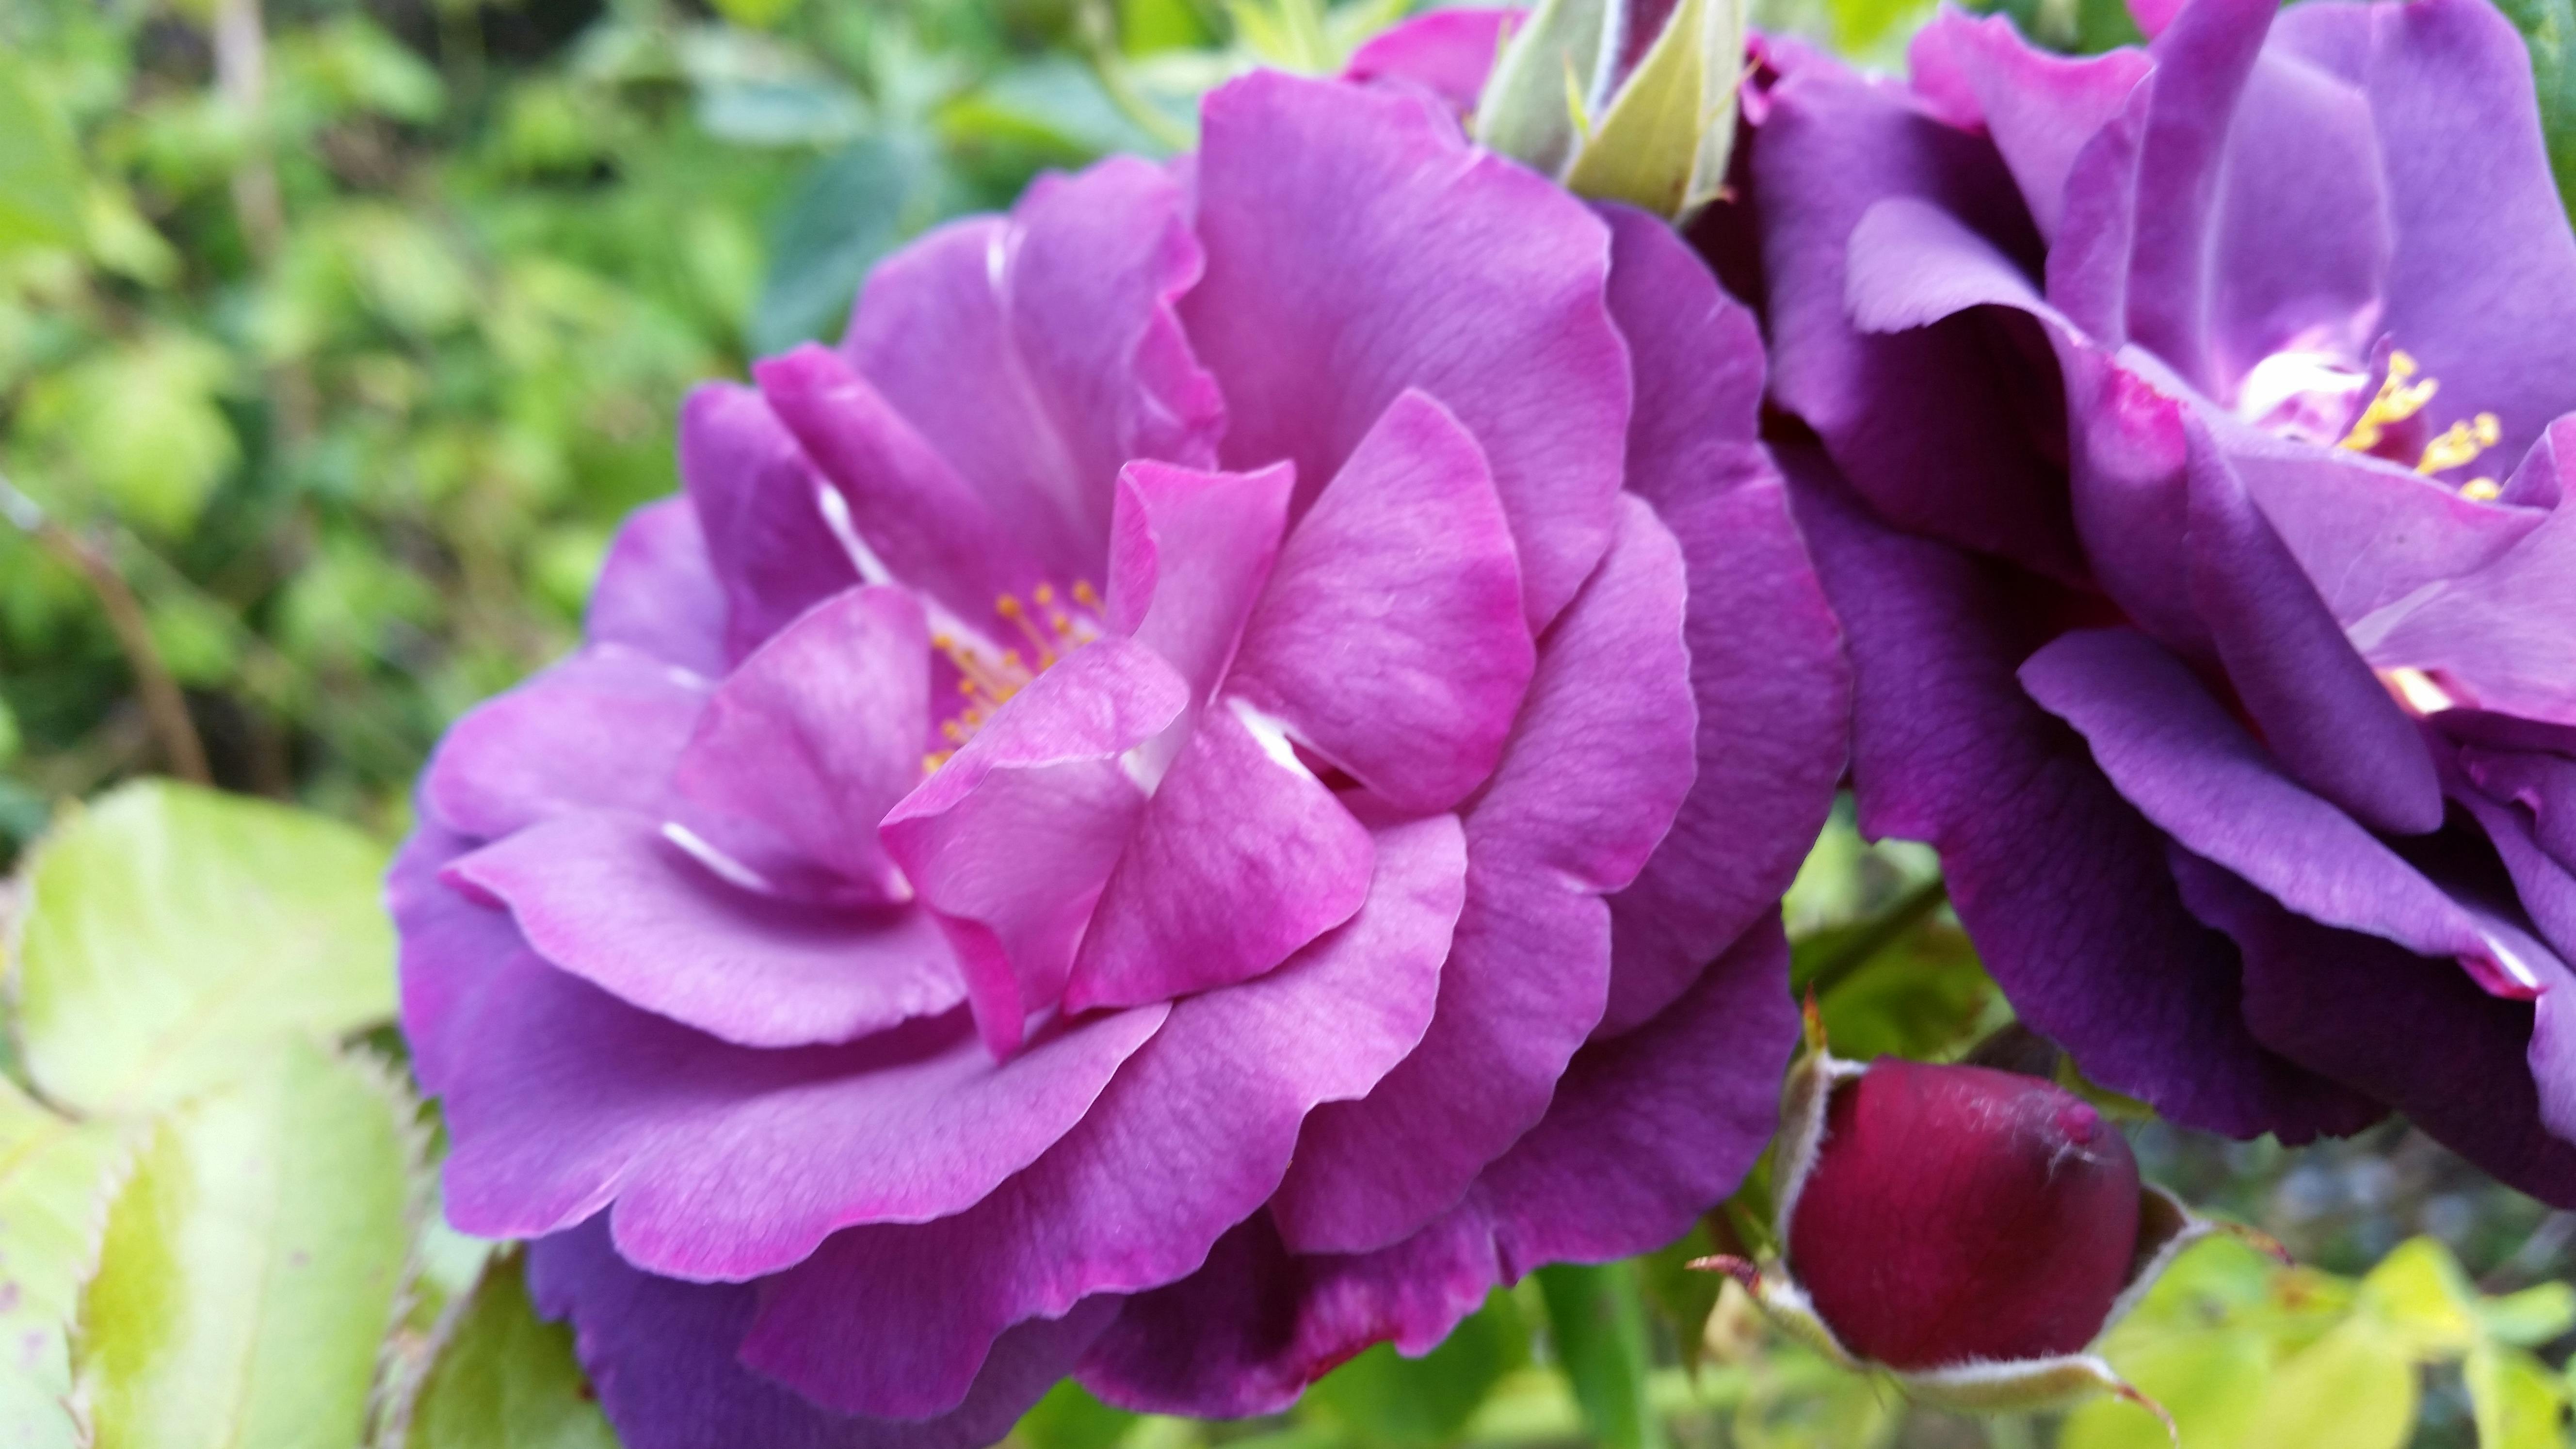 Free stock photo of purple roses at suicide crisis centre